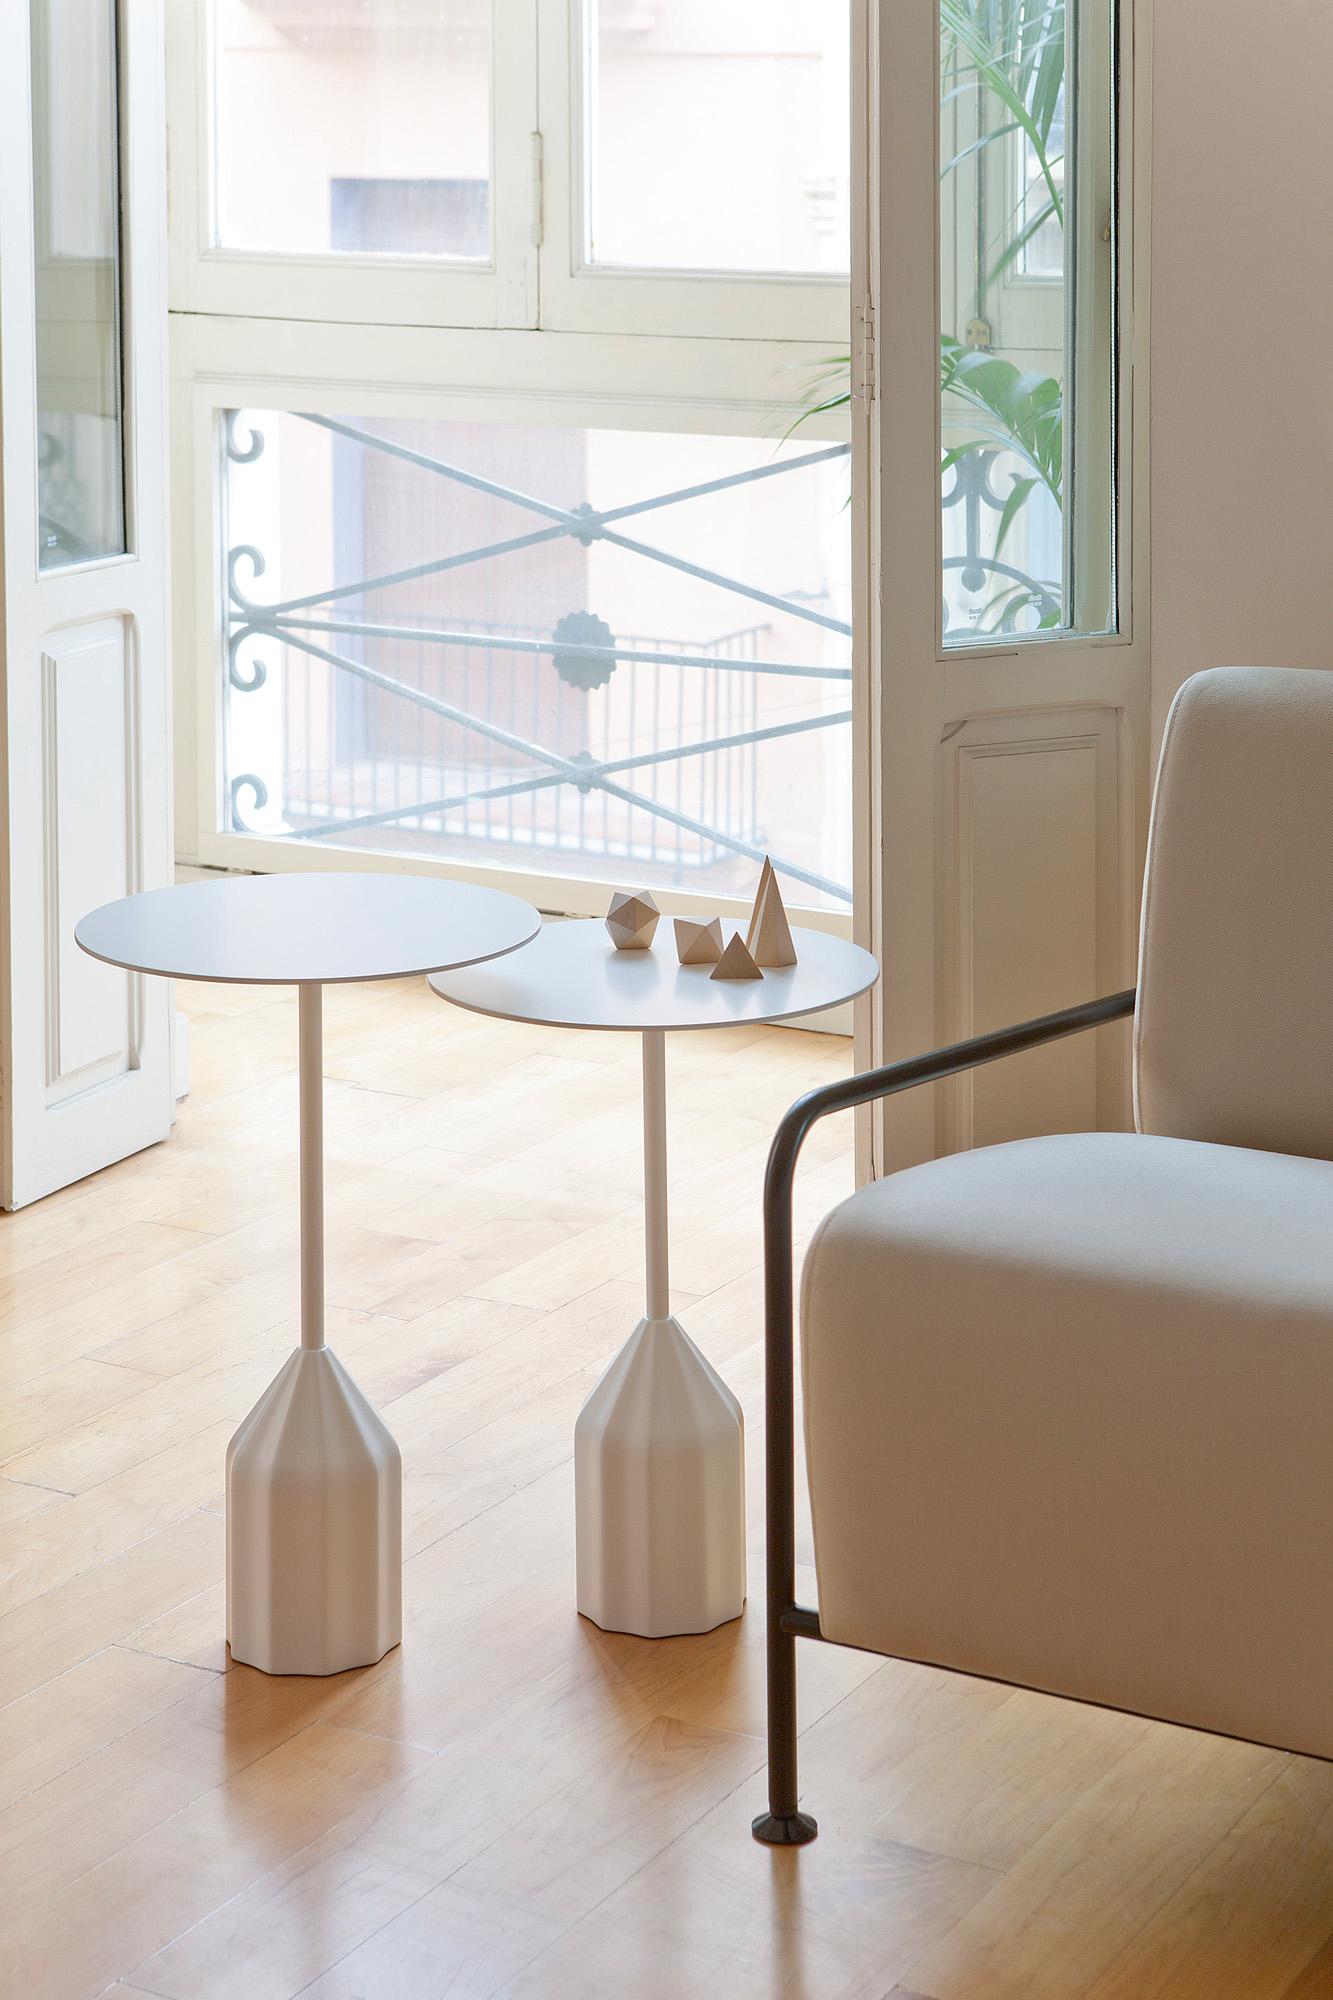 The little brother of the popular Burin dining table by Patricia Urquiola. Measure: H 19.6 inches

This sculptural side table is available in black and white designed by Patricia Urquiola for Viccarbe. 

Its strong personality makes it a very